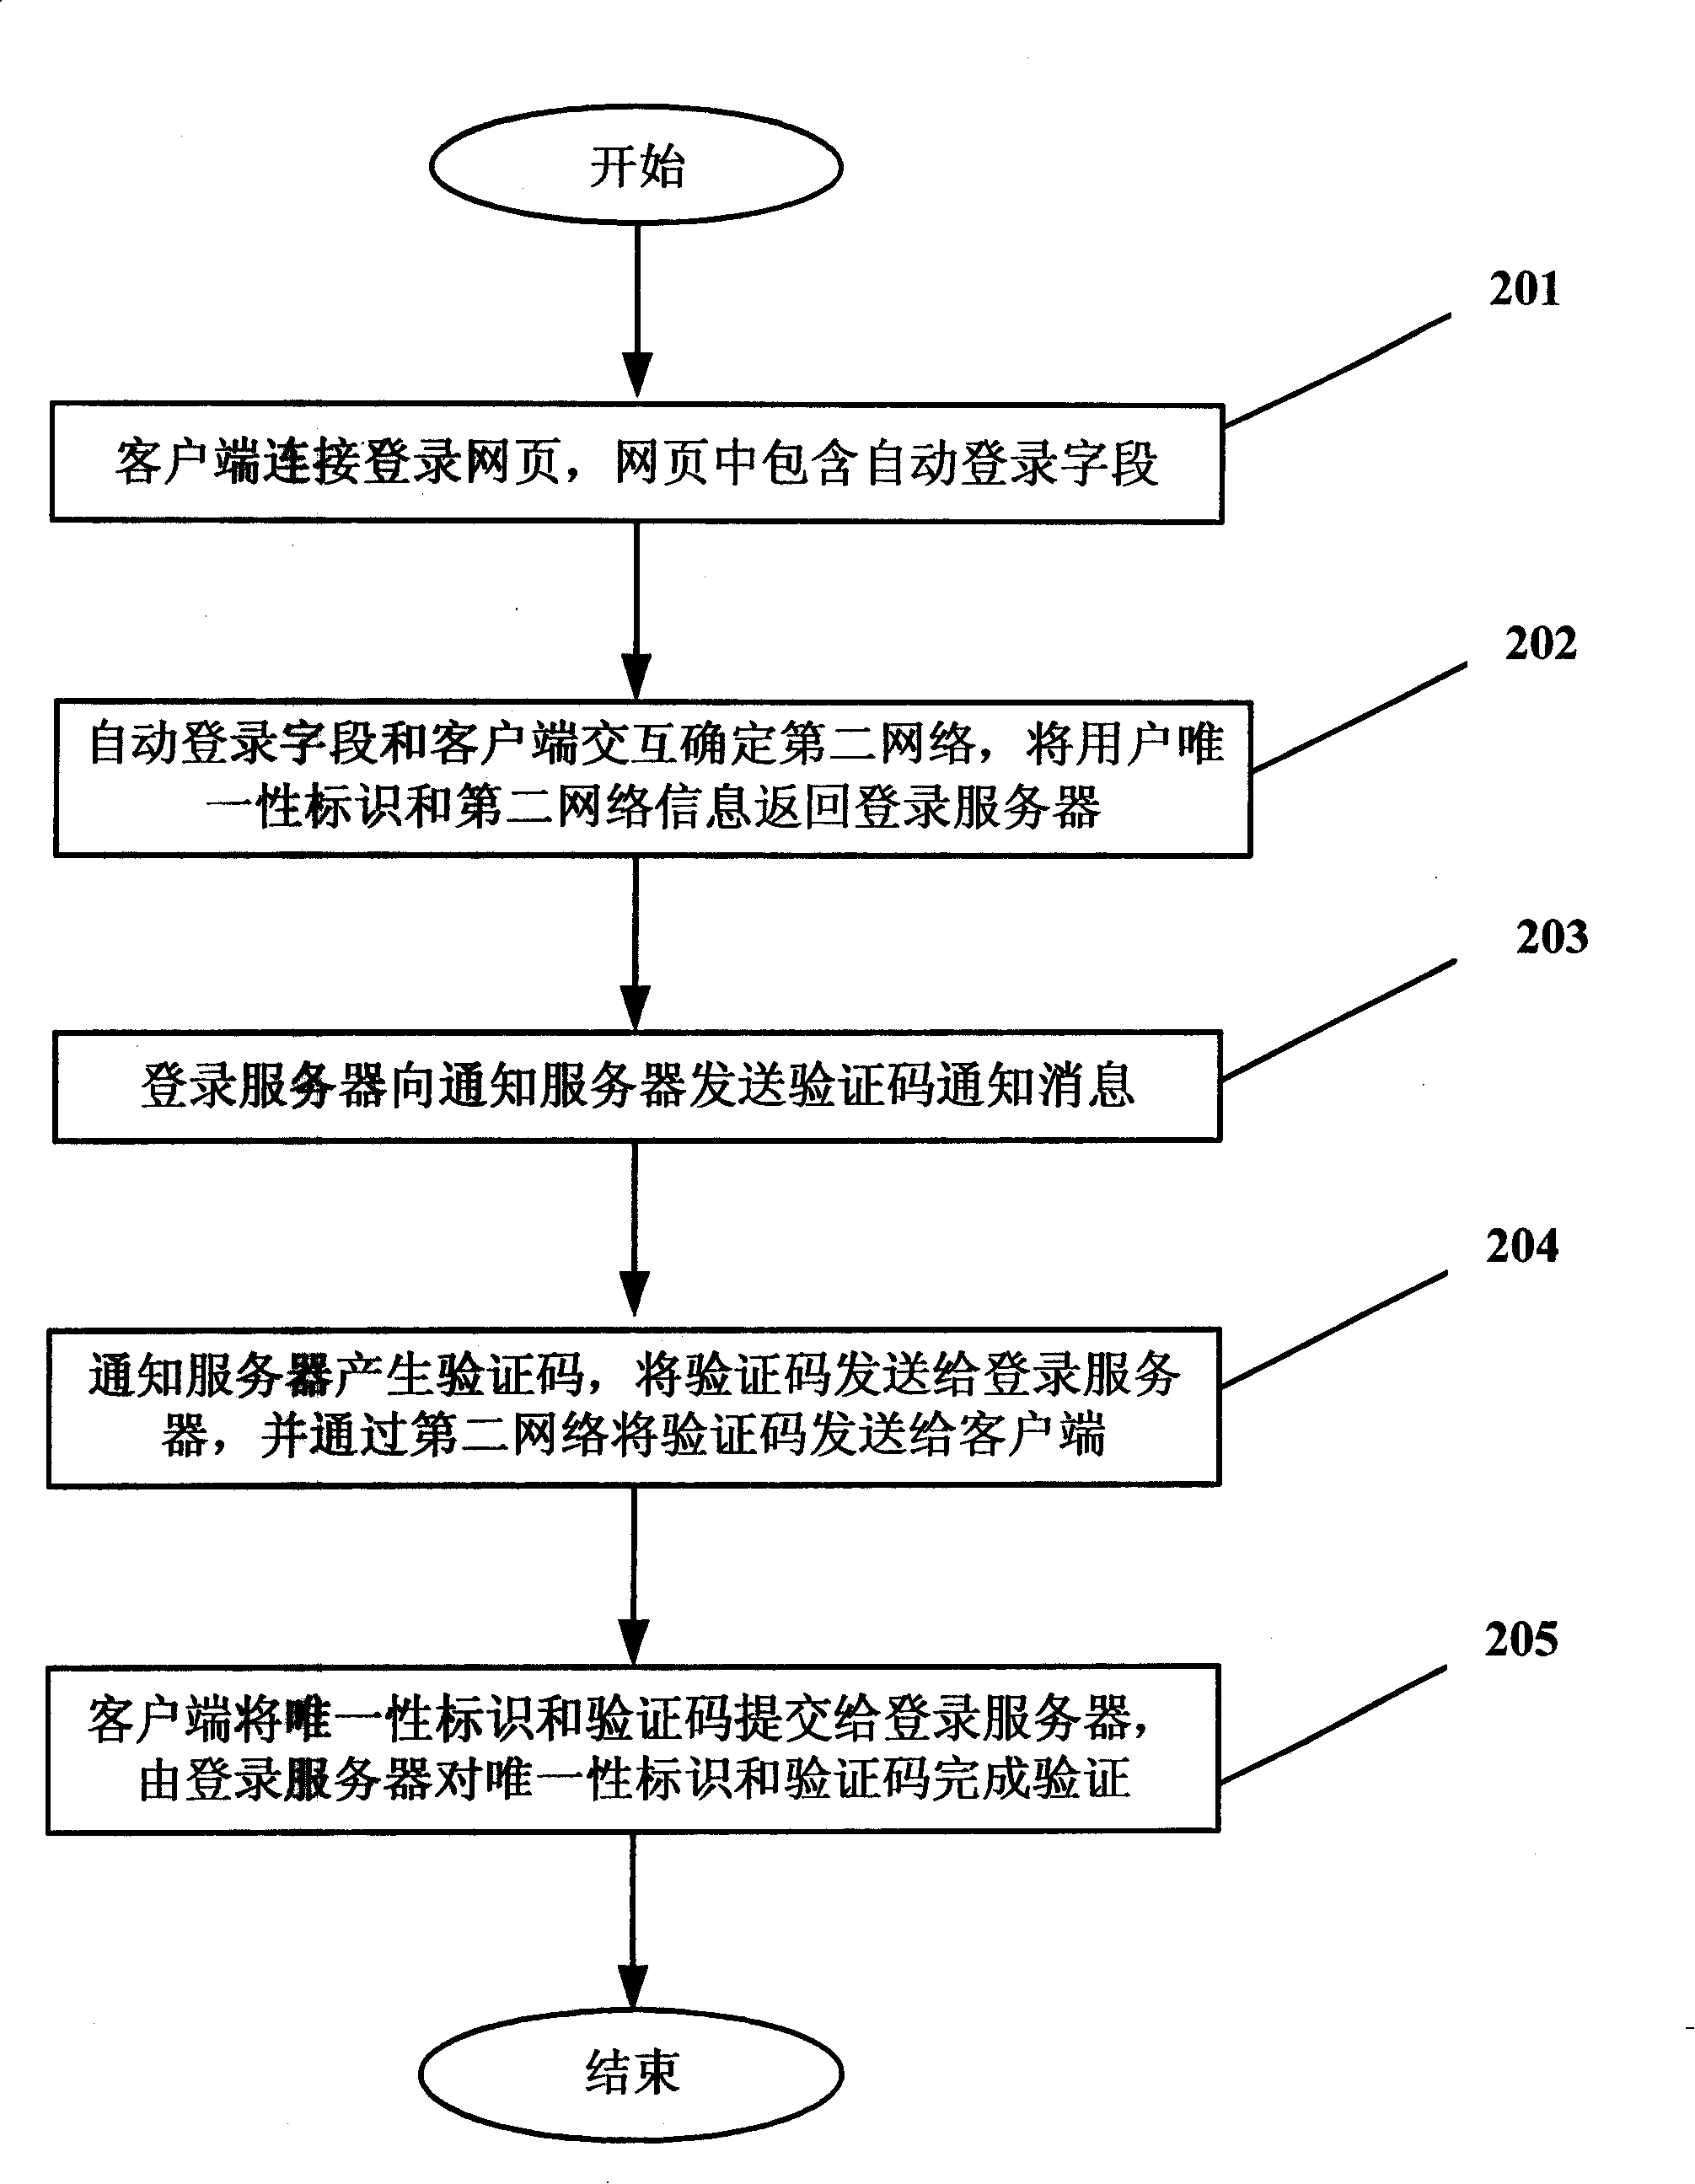 A validation method and system based on heterogeneous network